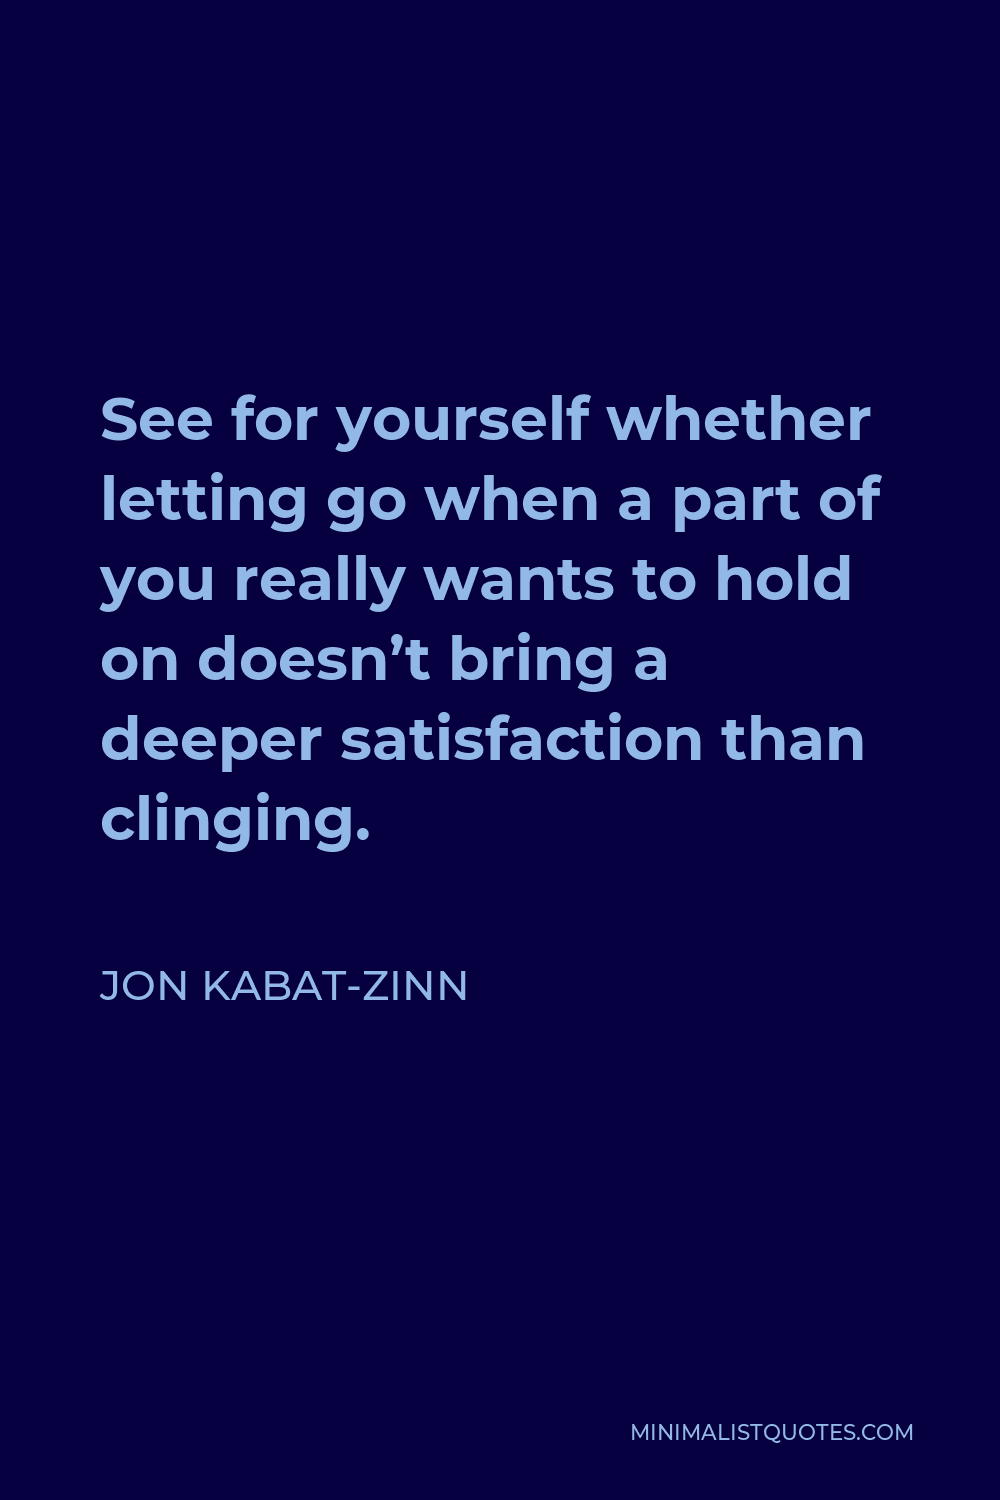 Jon Kabat-Zinn Quote - See for yourself whether letting go when a part of you really wants to hold on doesn’t bring a deeper satisfaction than clinging.